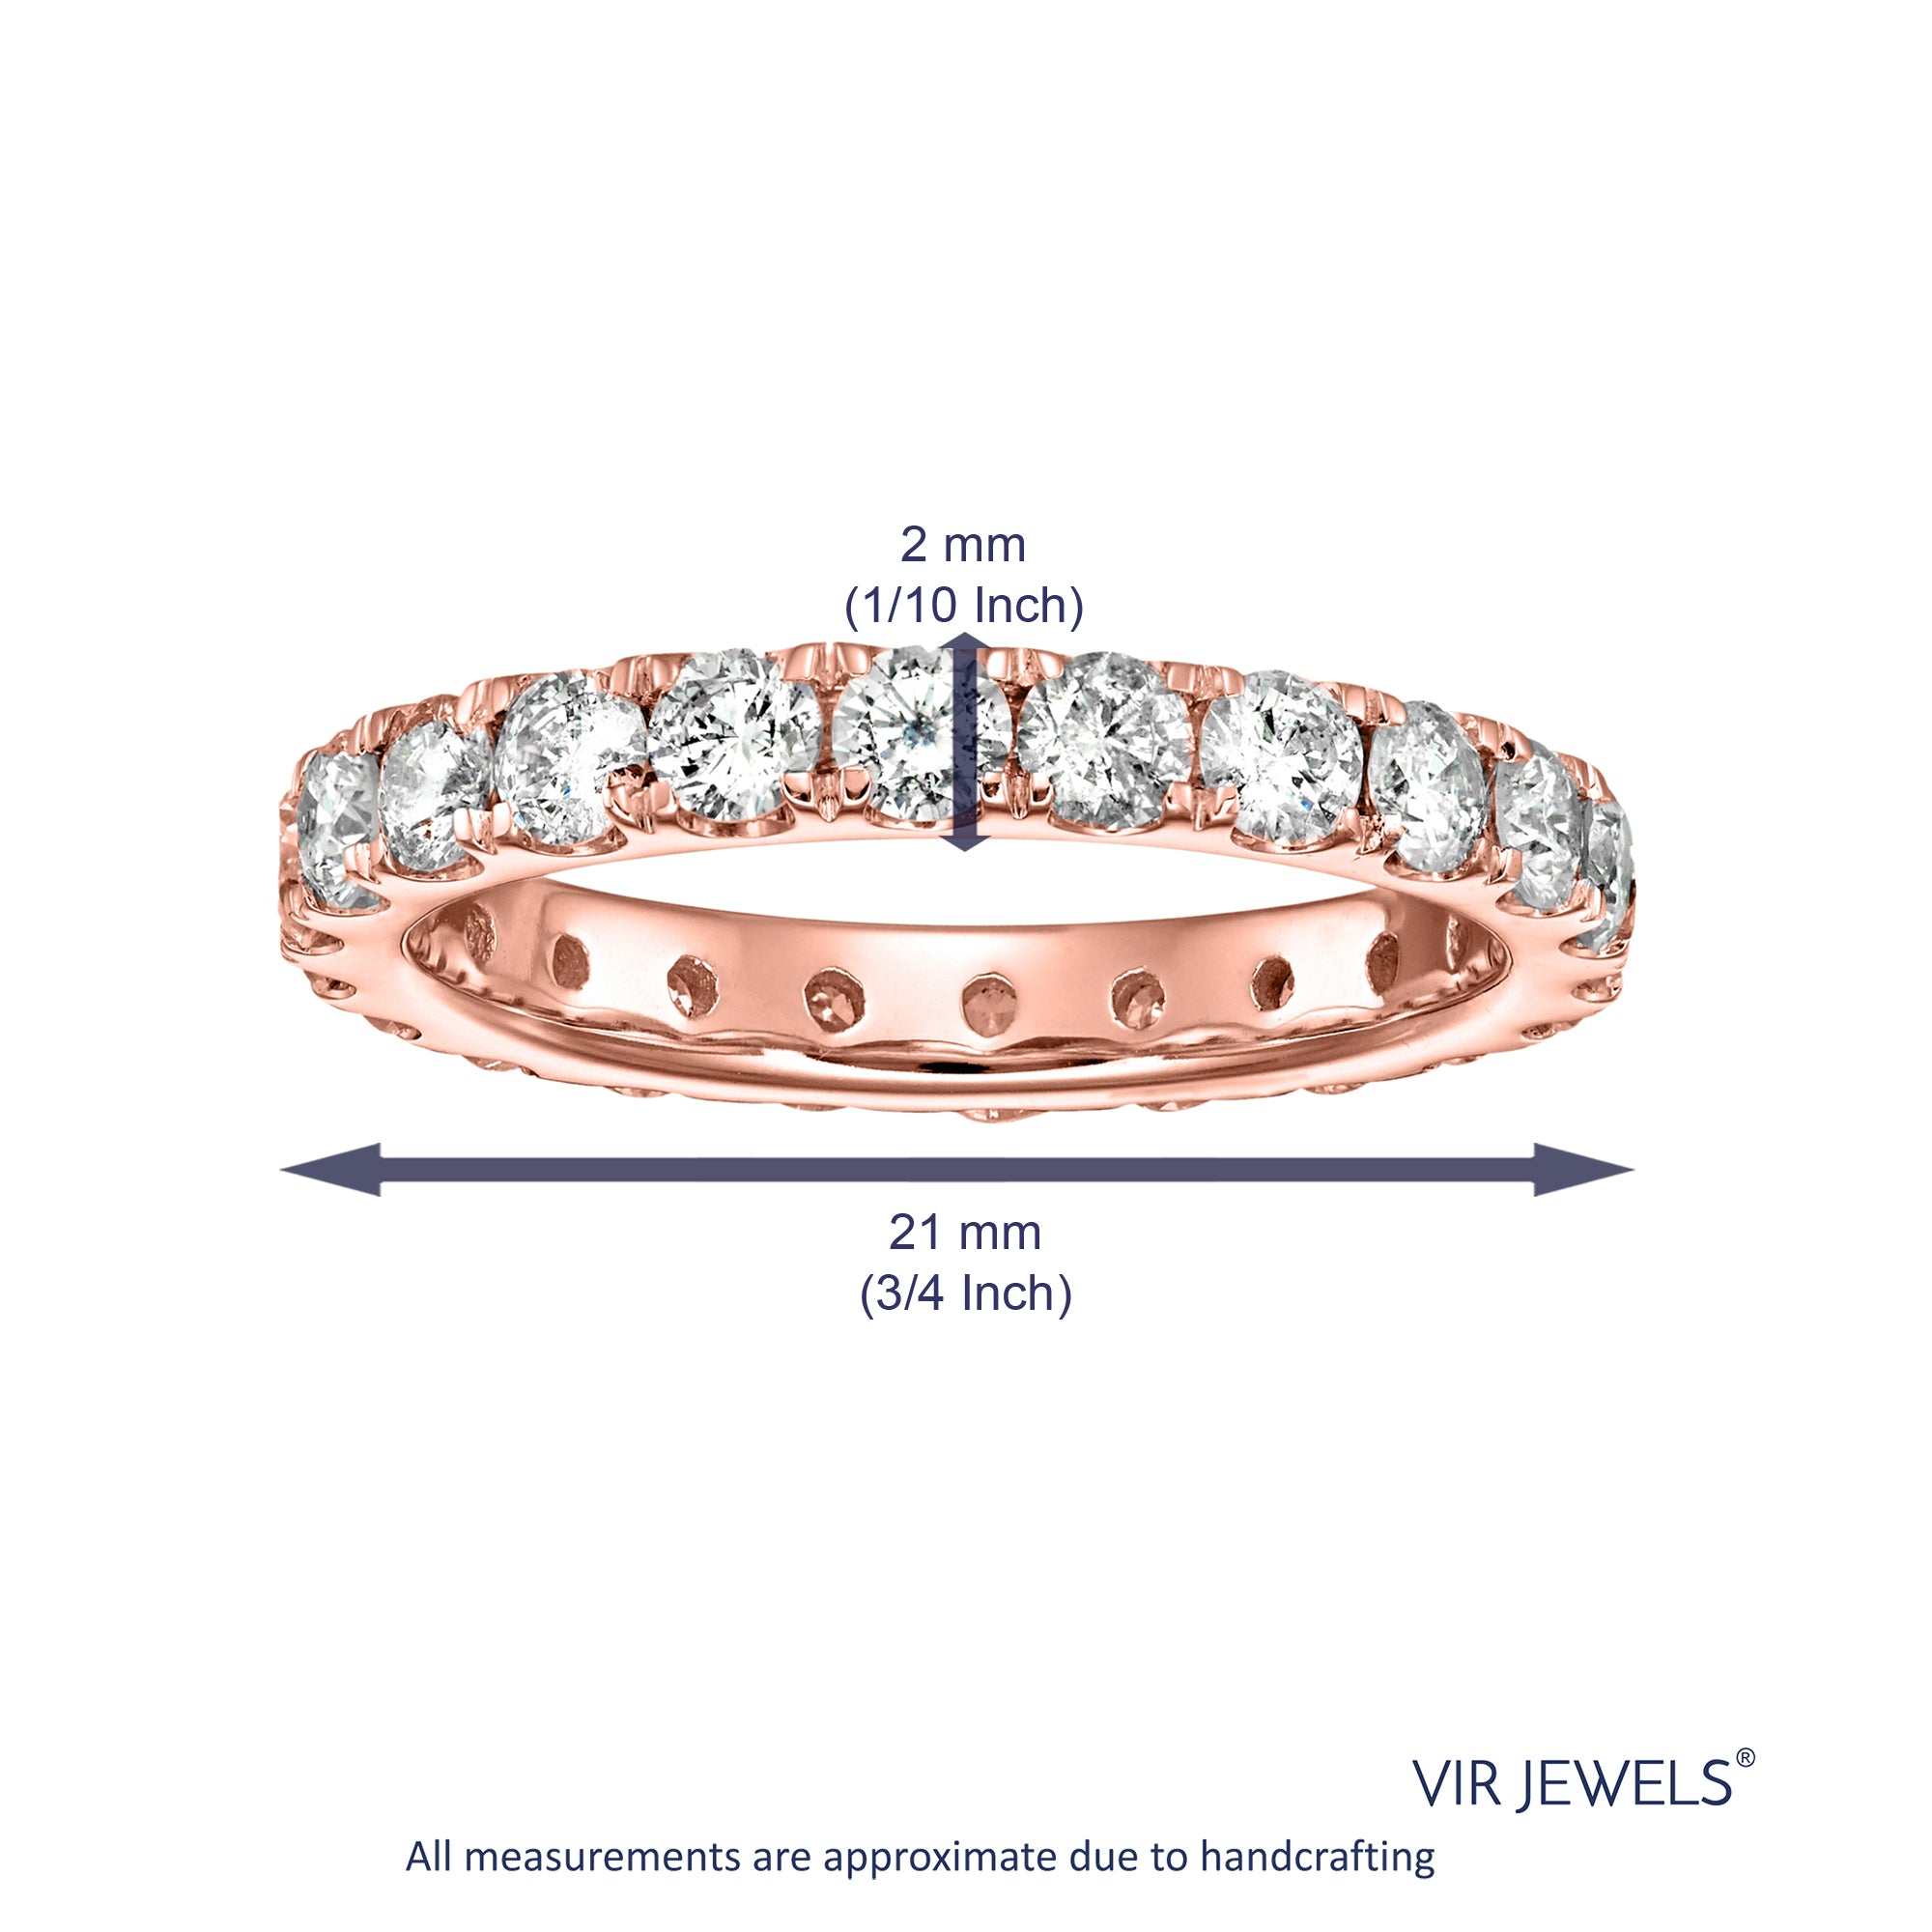 2 cttw Diamond Eternity Ring for Women, Wedding Band in 14K Rose Gold Prong Set, Size 4.5-10